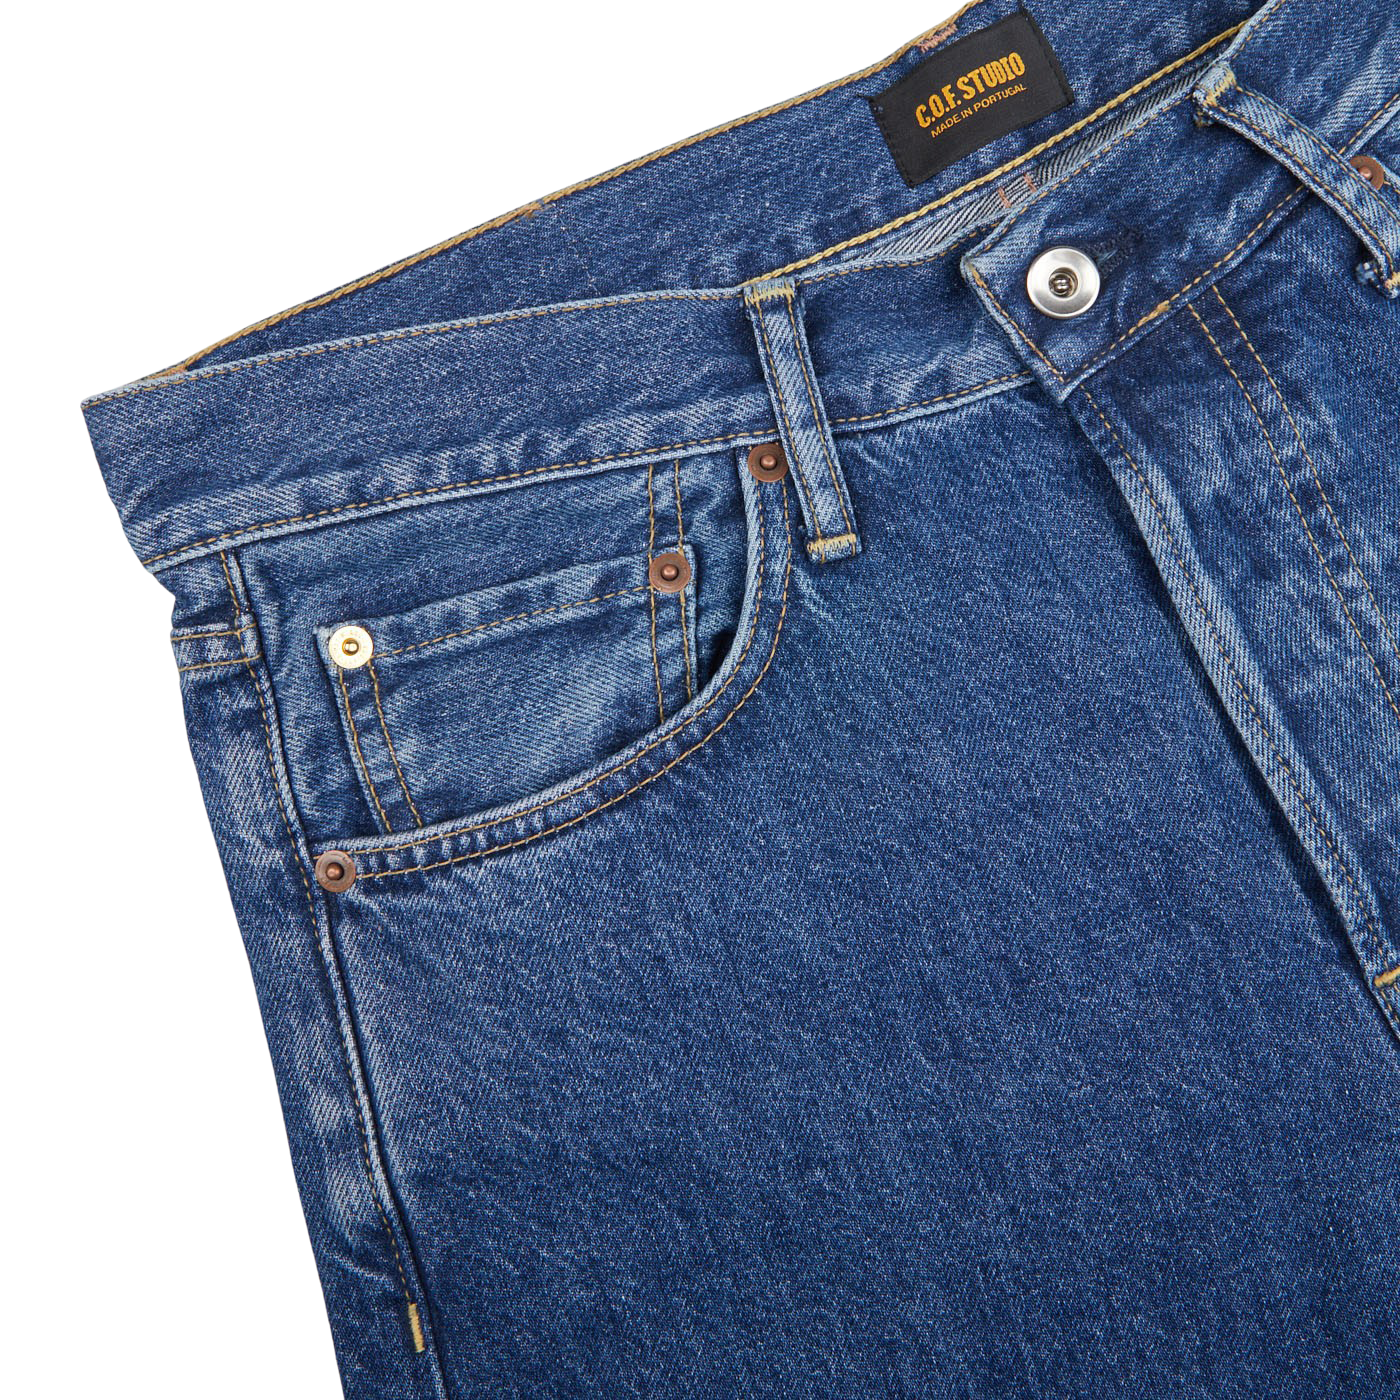 The tailored fit back pocket of a pair of C.O.F Studio Blue Organic Candiani Cotton M6 6x Wash Jeans.